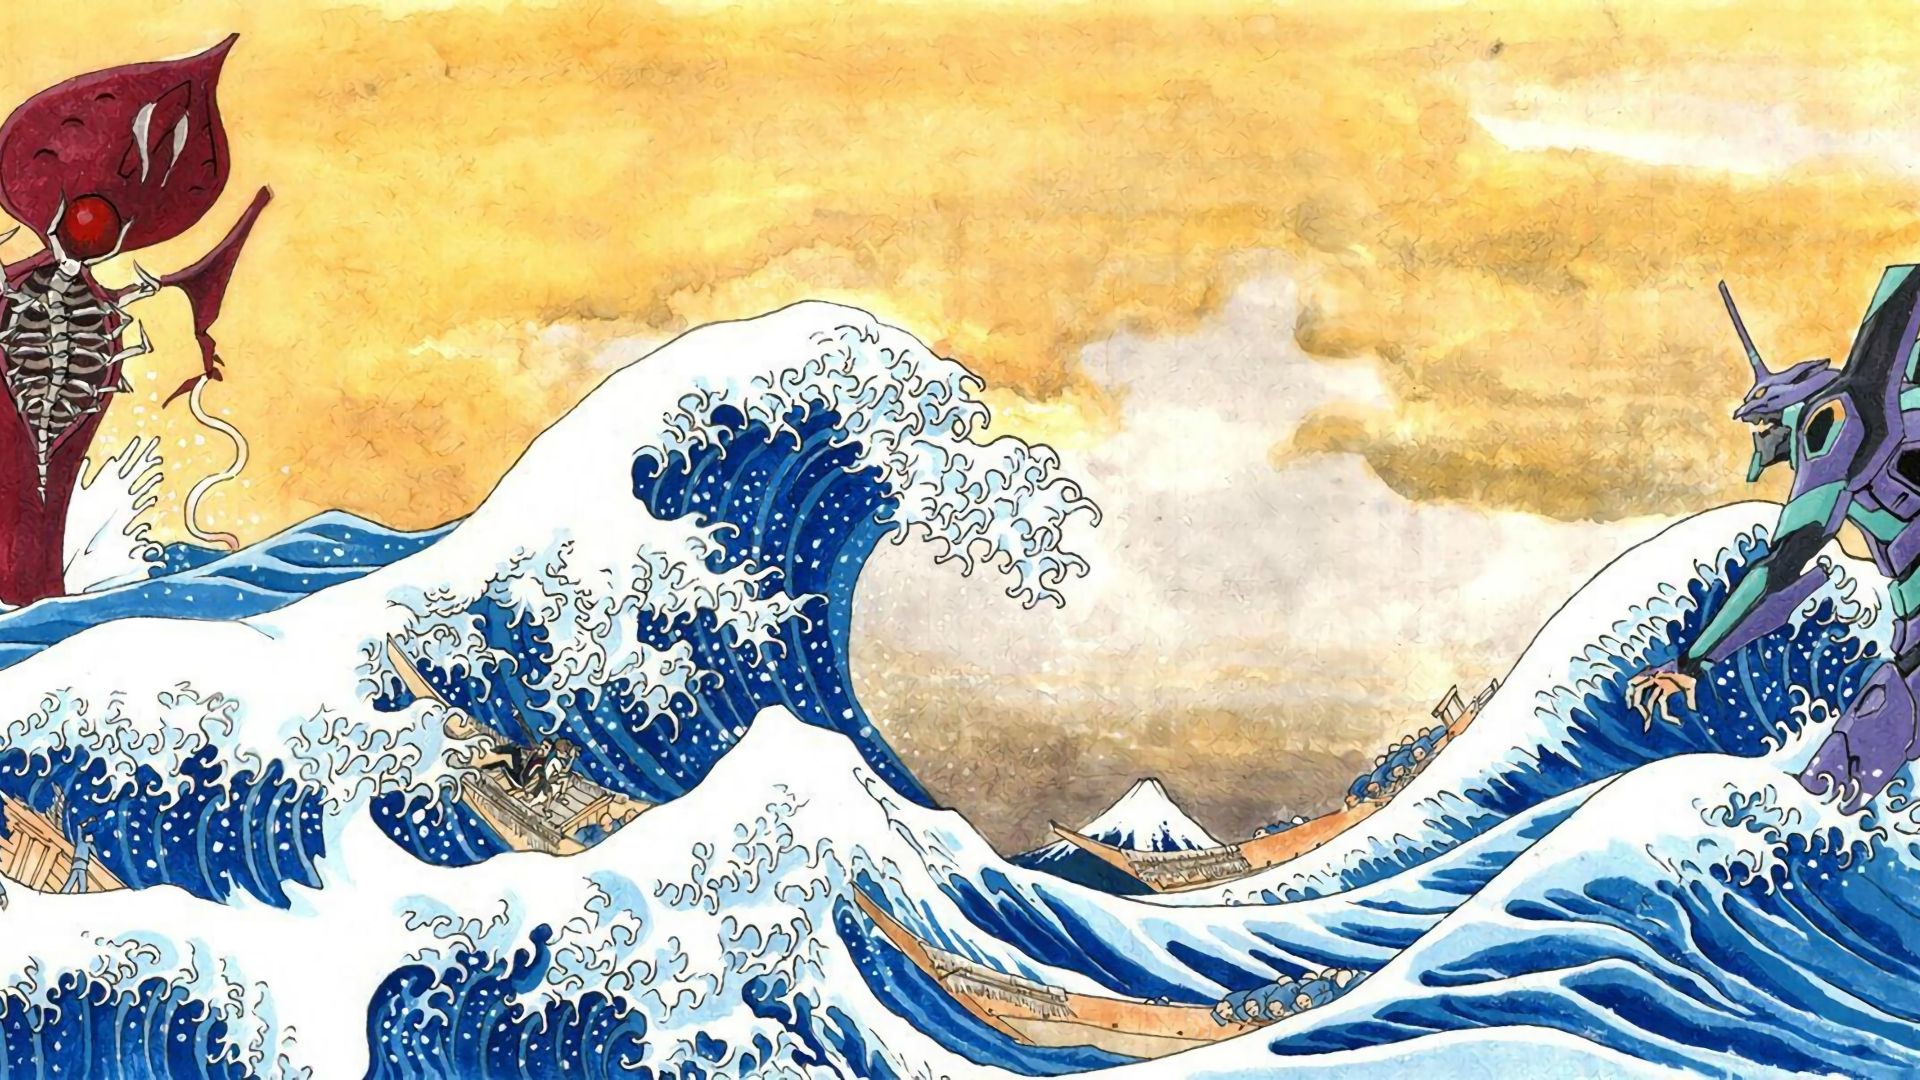 Great Wave off Anime wallpaper in 1920x1080 resolution